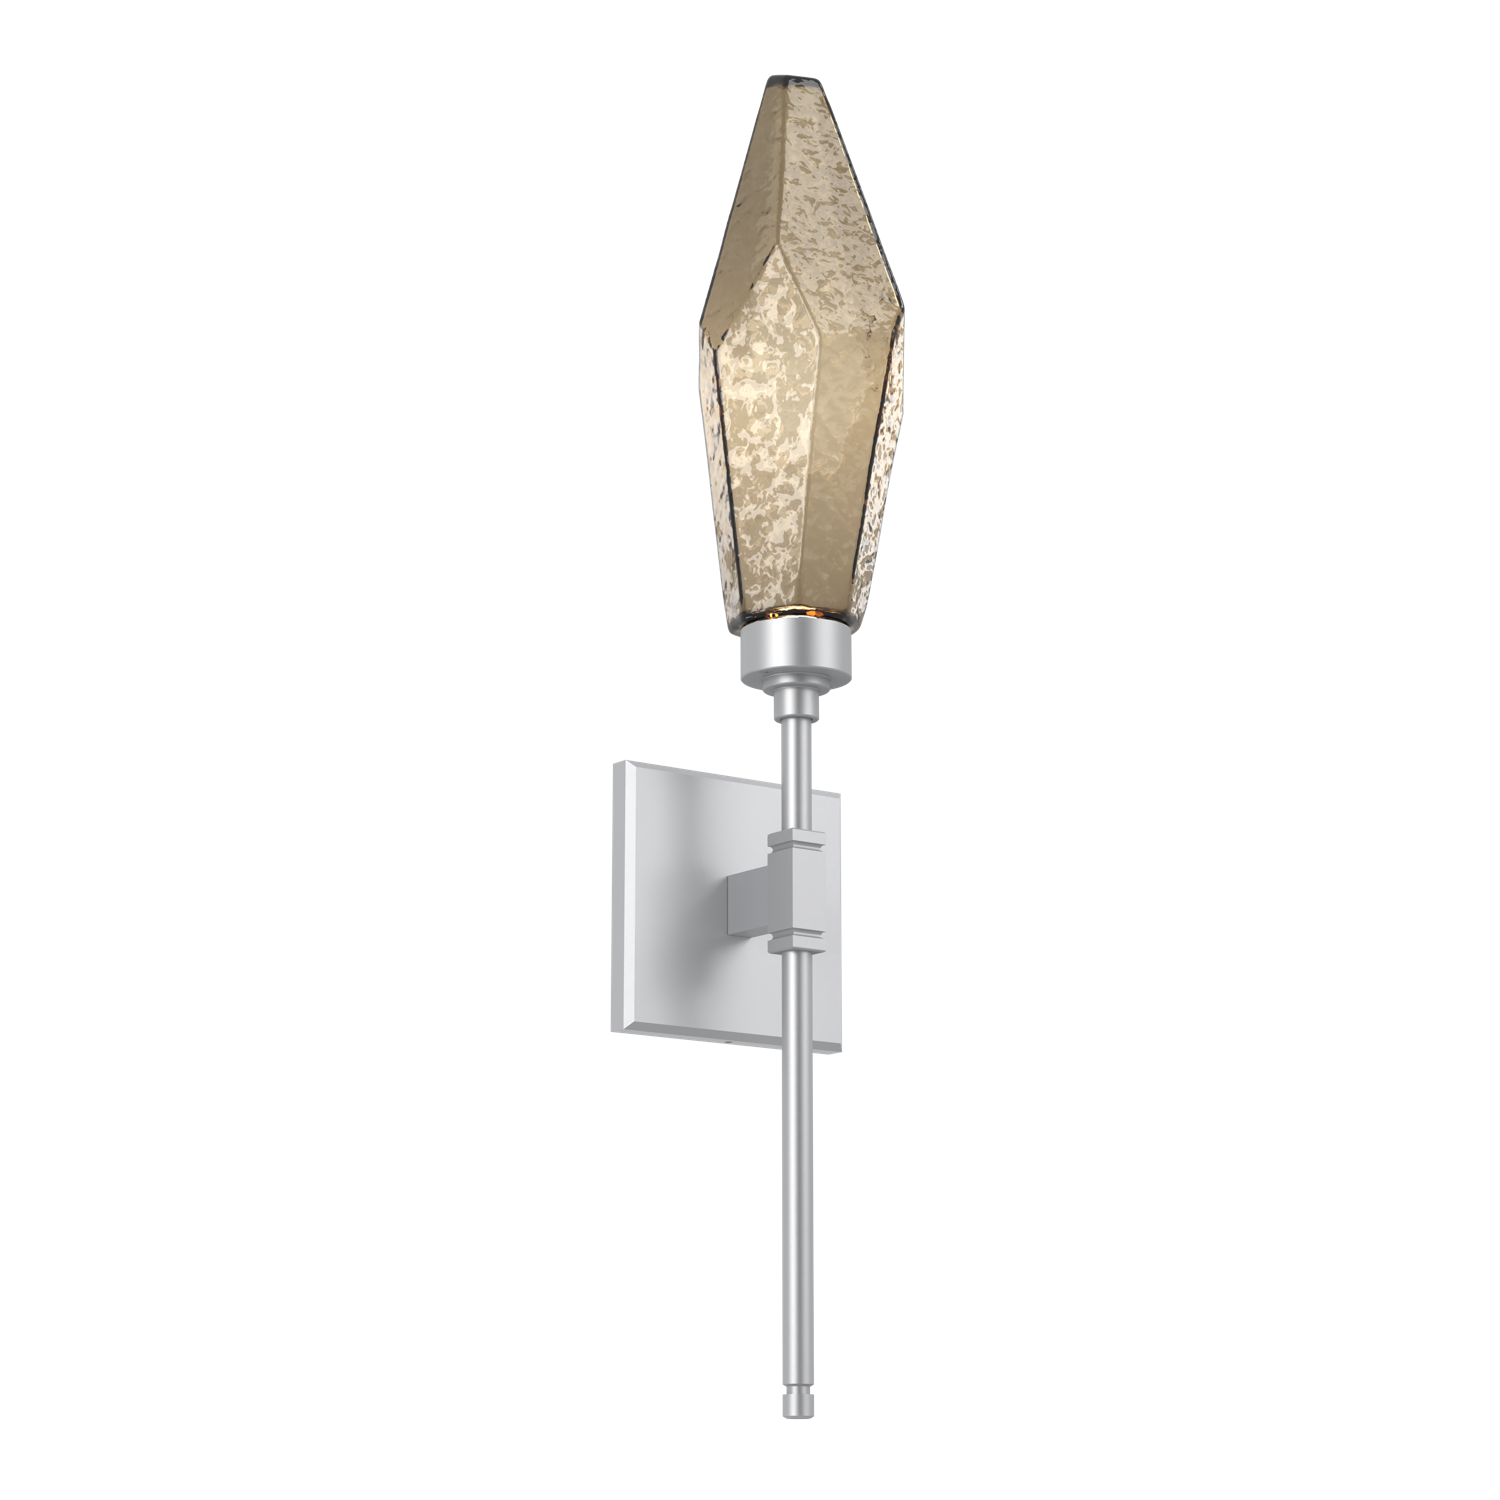 IDB0050-04-CS-CB-Hammerton-Studio-Rock-Crystal-ada-certified-belvedere-wall-sconce-with-classic-silver-finish-and-chilled-bronze-blown-glass-shades-and-LED-lamping